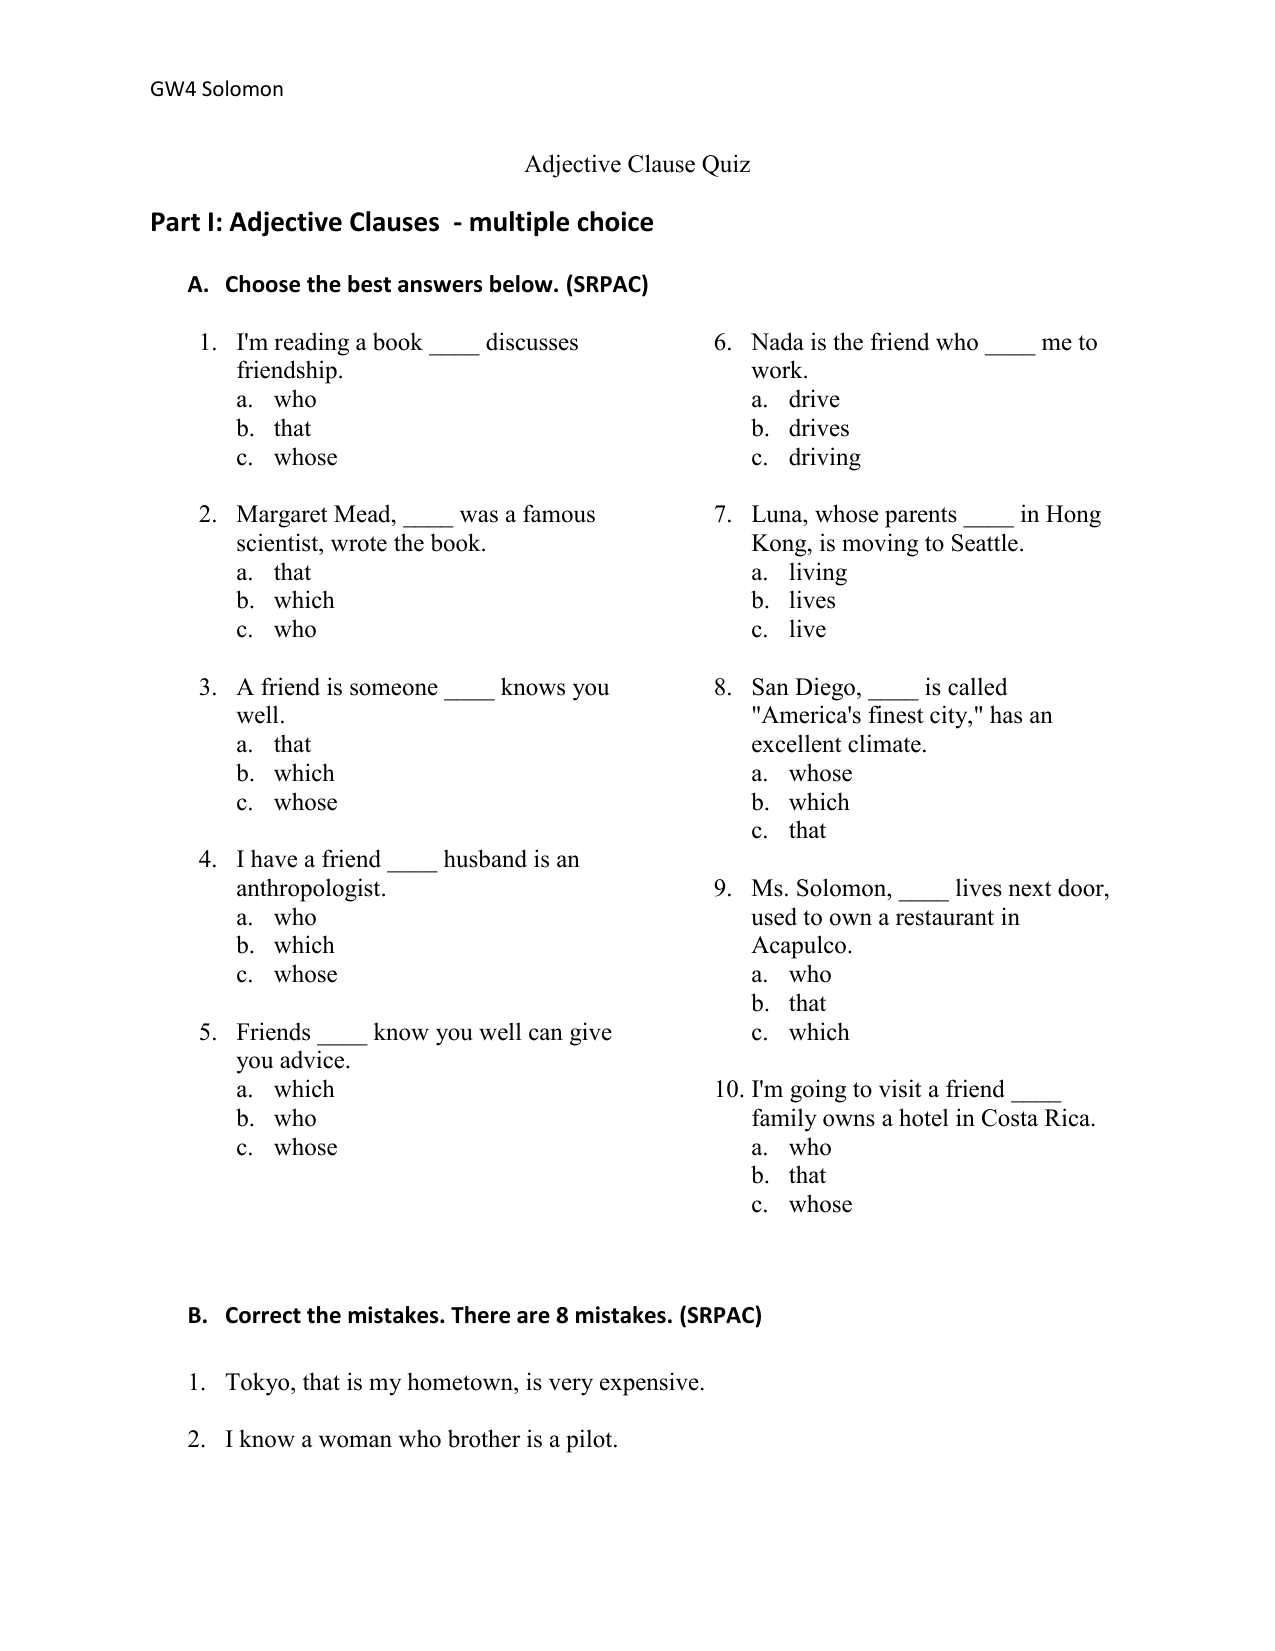 Part I Adjective Clauses Multiple Choice